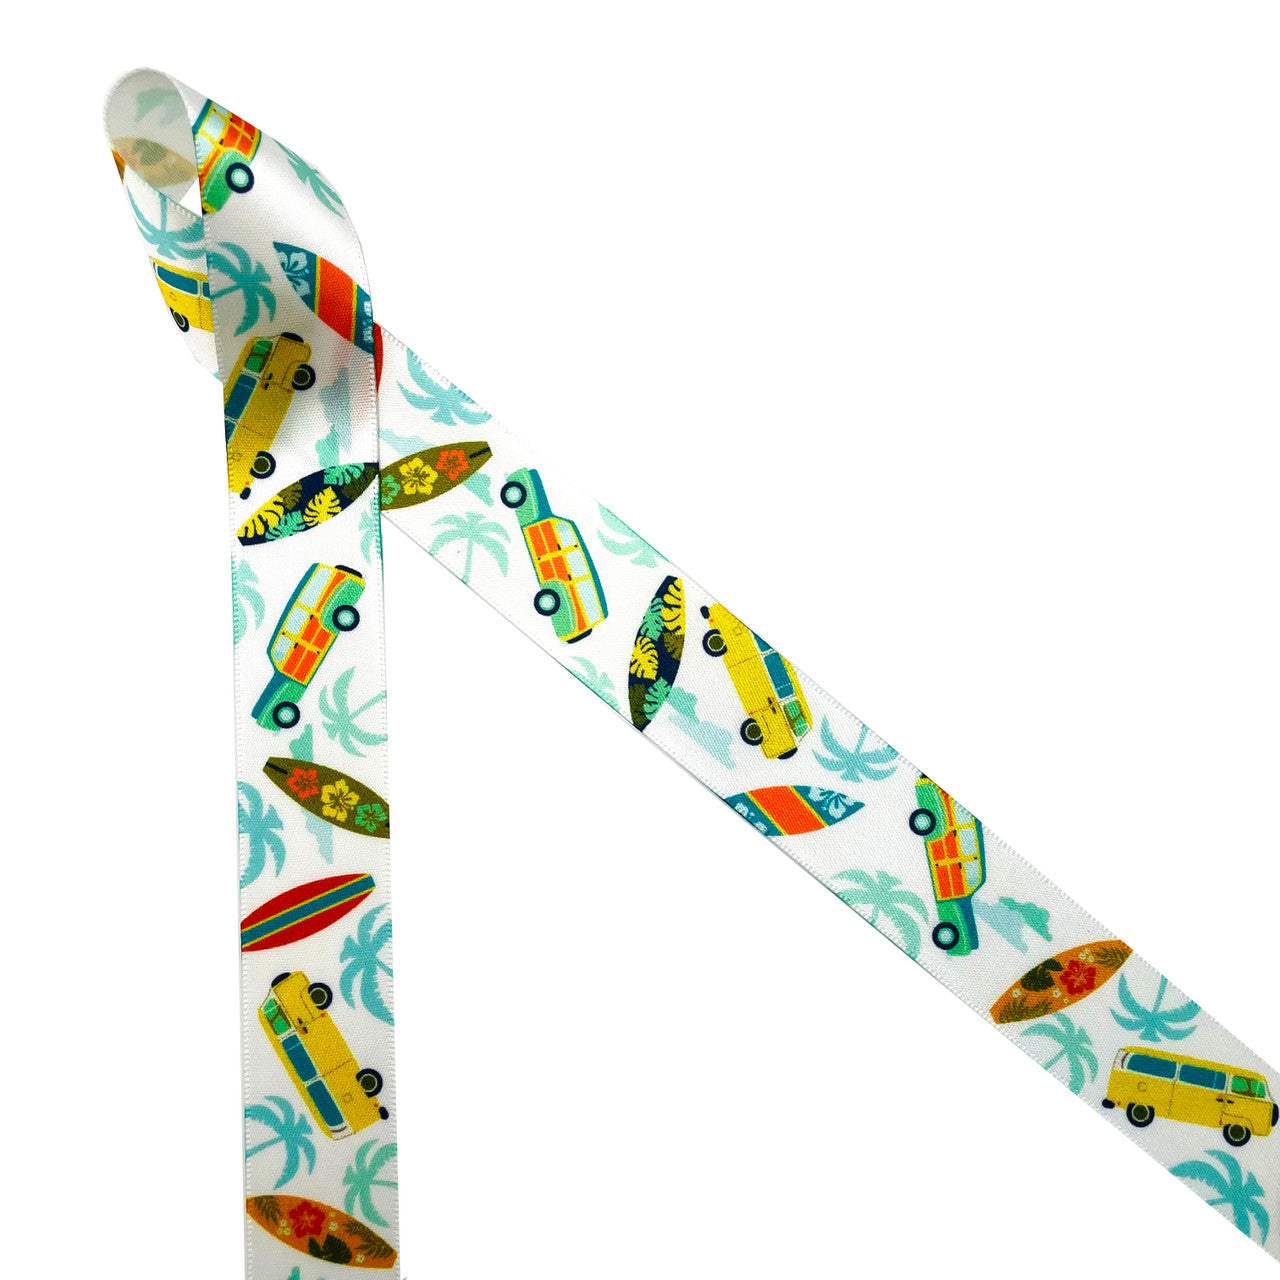 Surfing ribbon featuring surfboards, palm trees and vintage Woodies printed on 7/8" white single face satin is the best ribbon for all things Summer fun! California Dreaming is the inspiration for this fun ribbon for Summer parties, beach parties, California themed events, gift wrap, gift baskets, party decor, party favors, cookies, cake pops and dessert tables. Use this ribbon for Summer crafts, hair bows, sewing and quilting projects too! All our ribbon is designed and printed in the USA